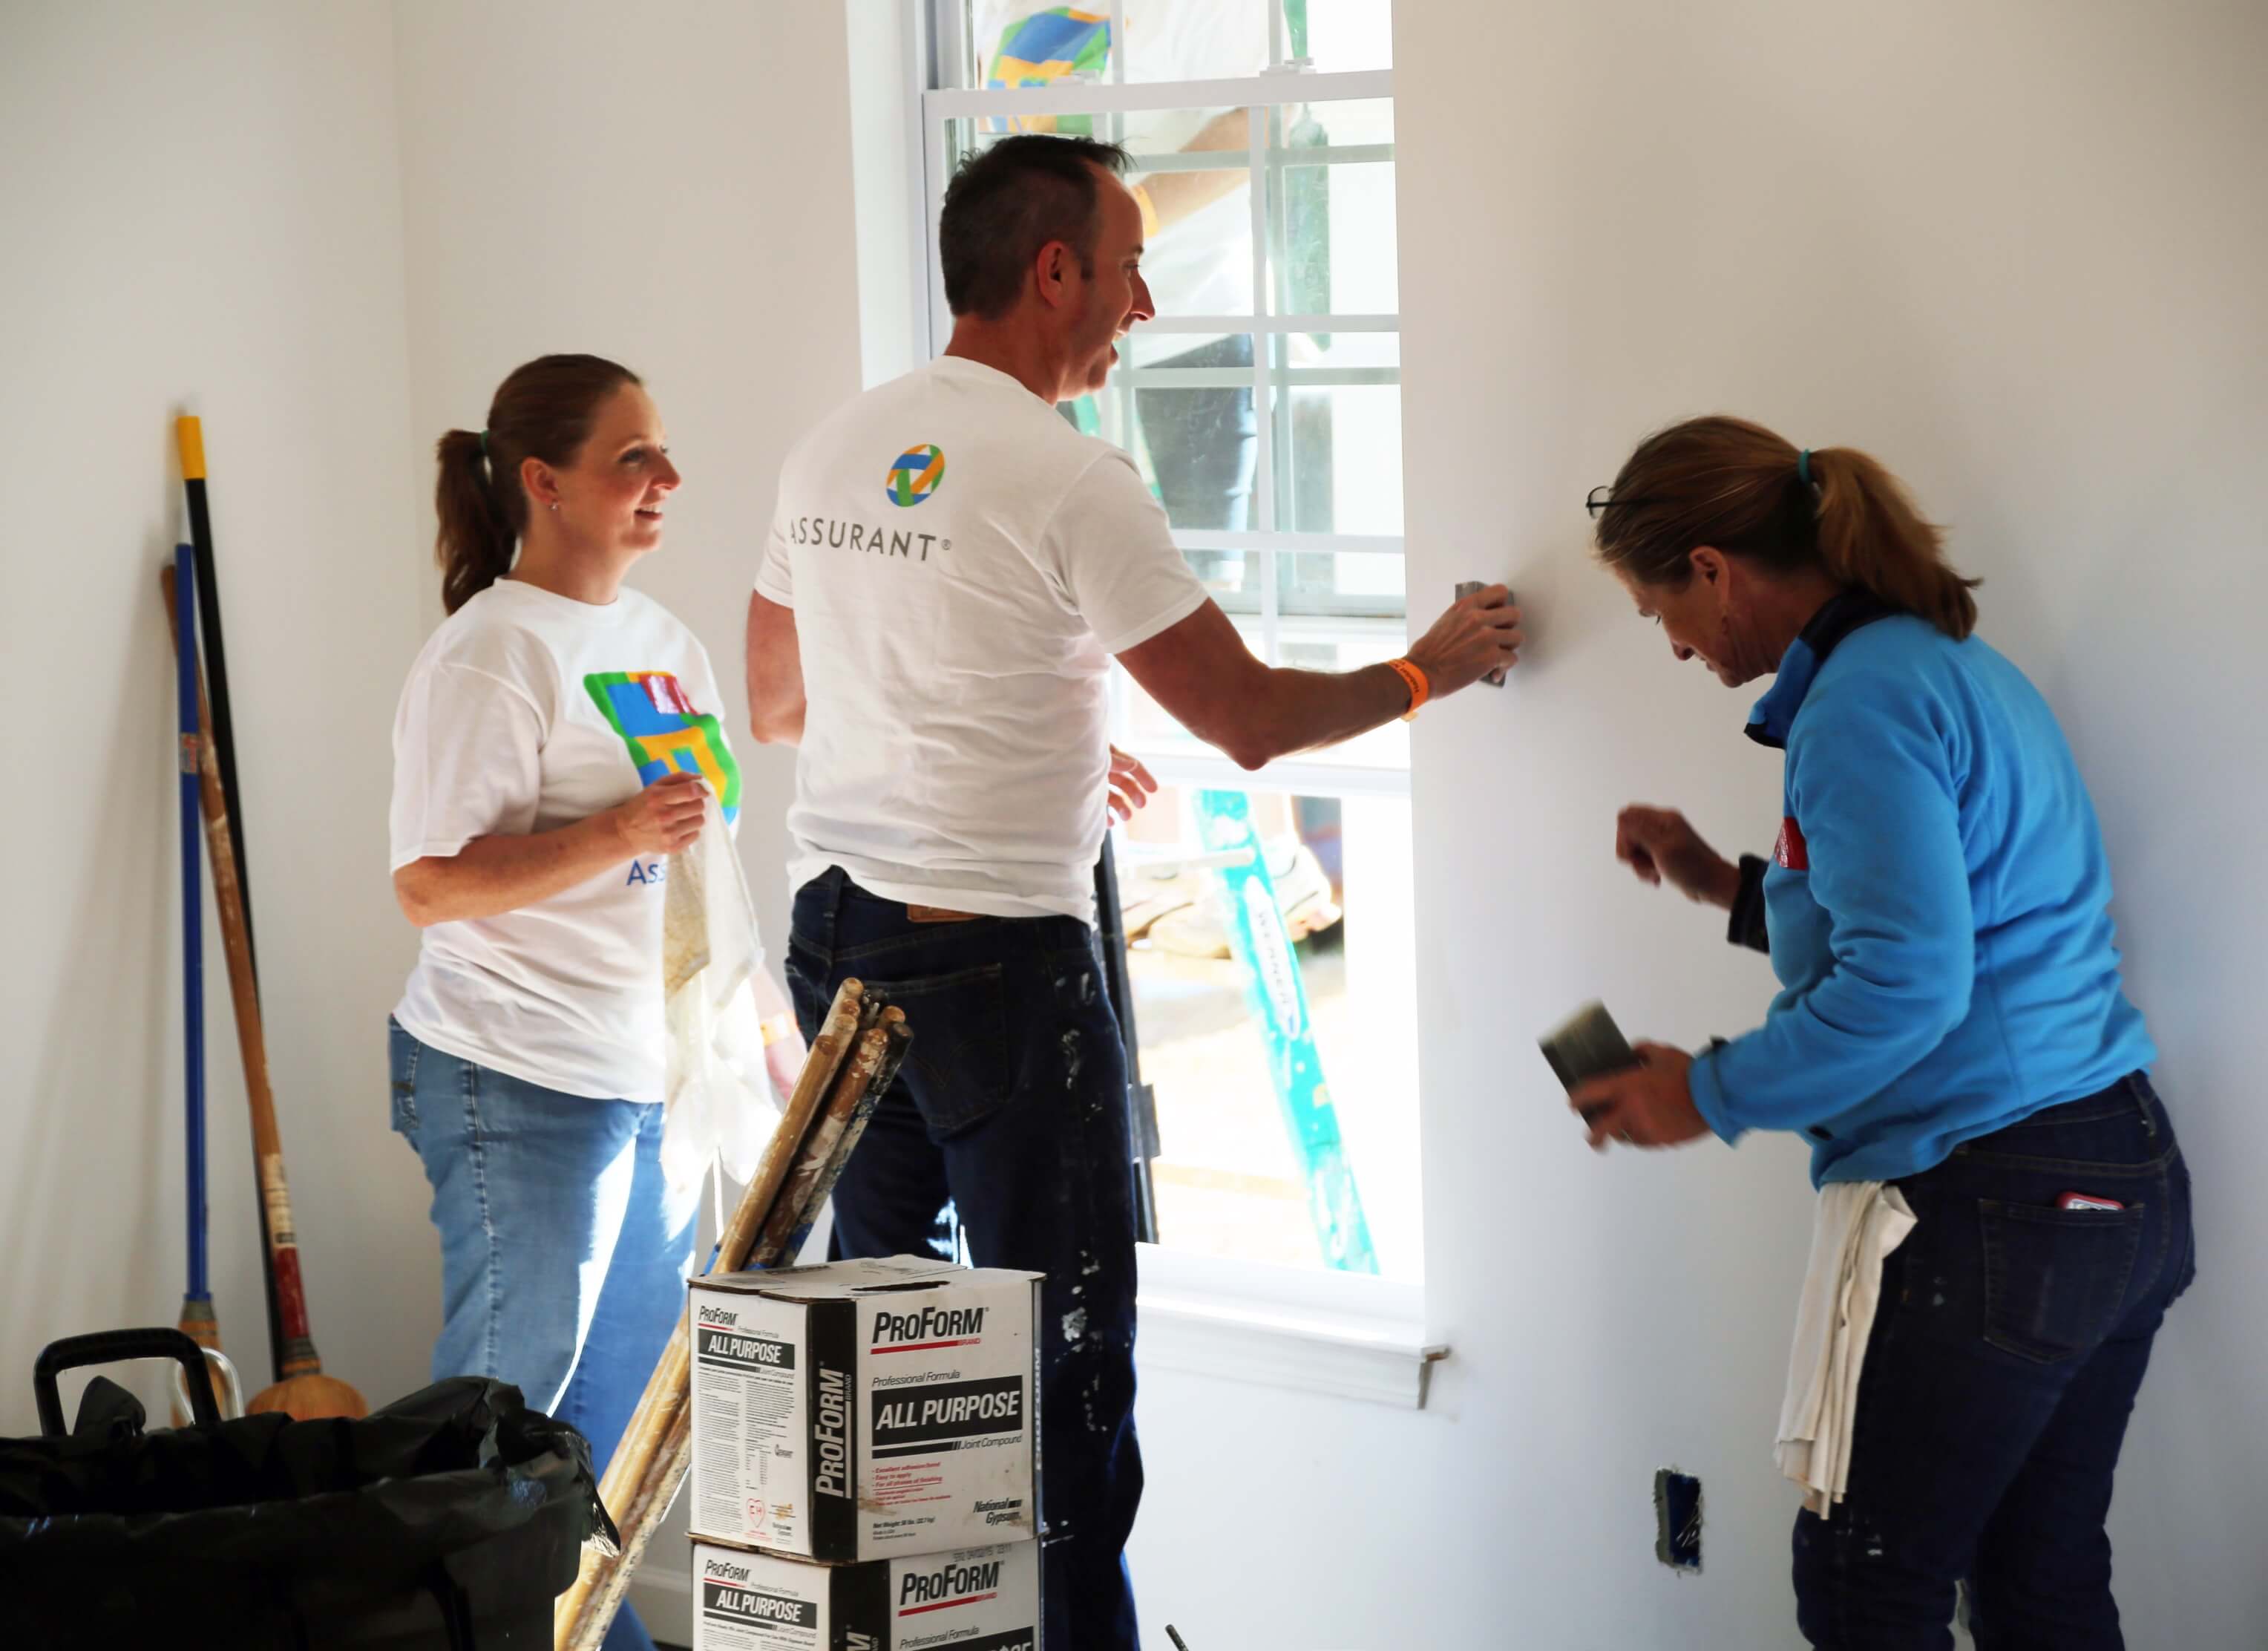 Three Assurant employees working at a Habitat for Humanity build sanding walls